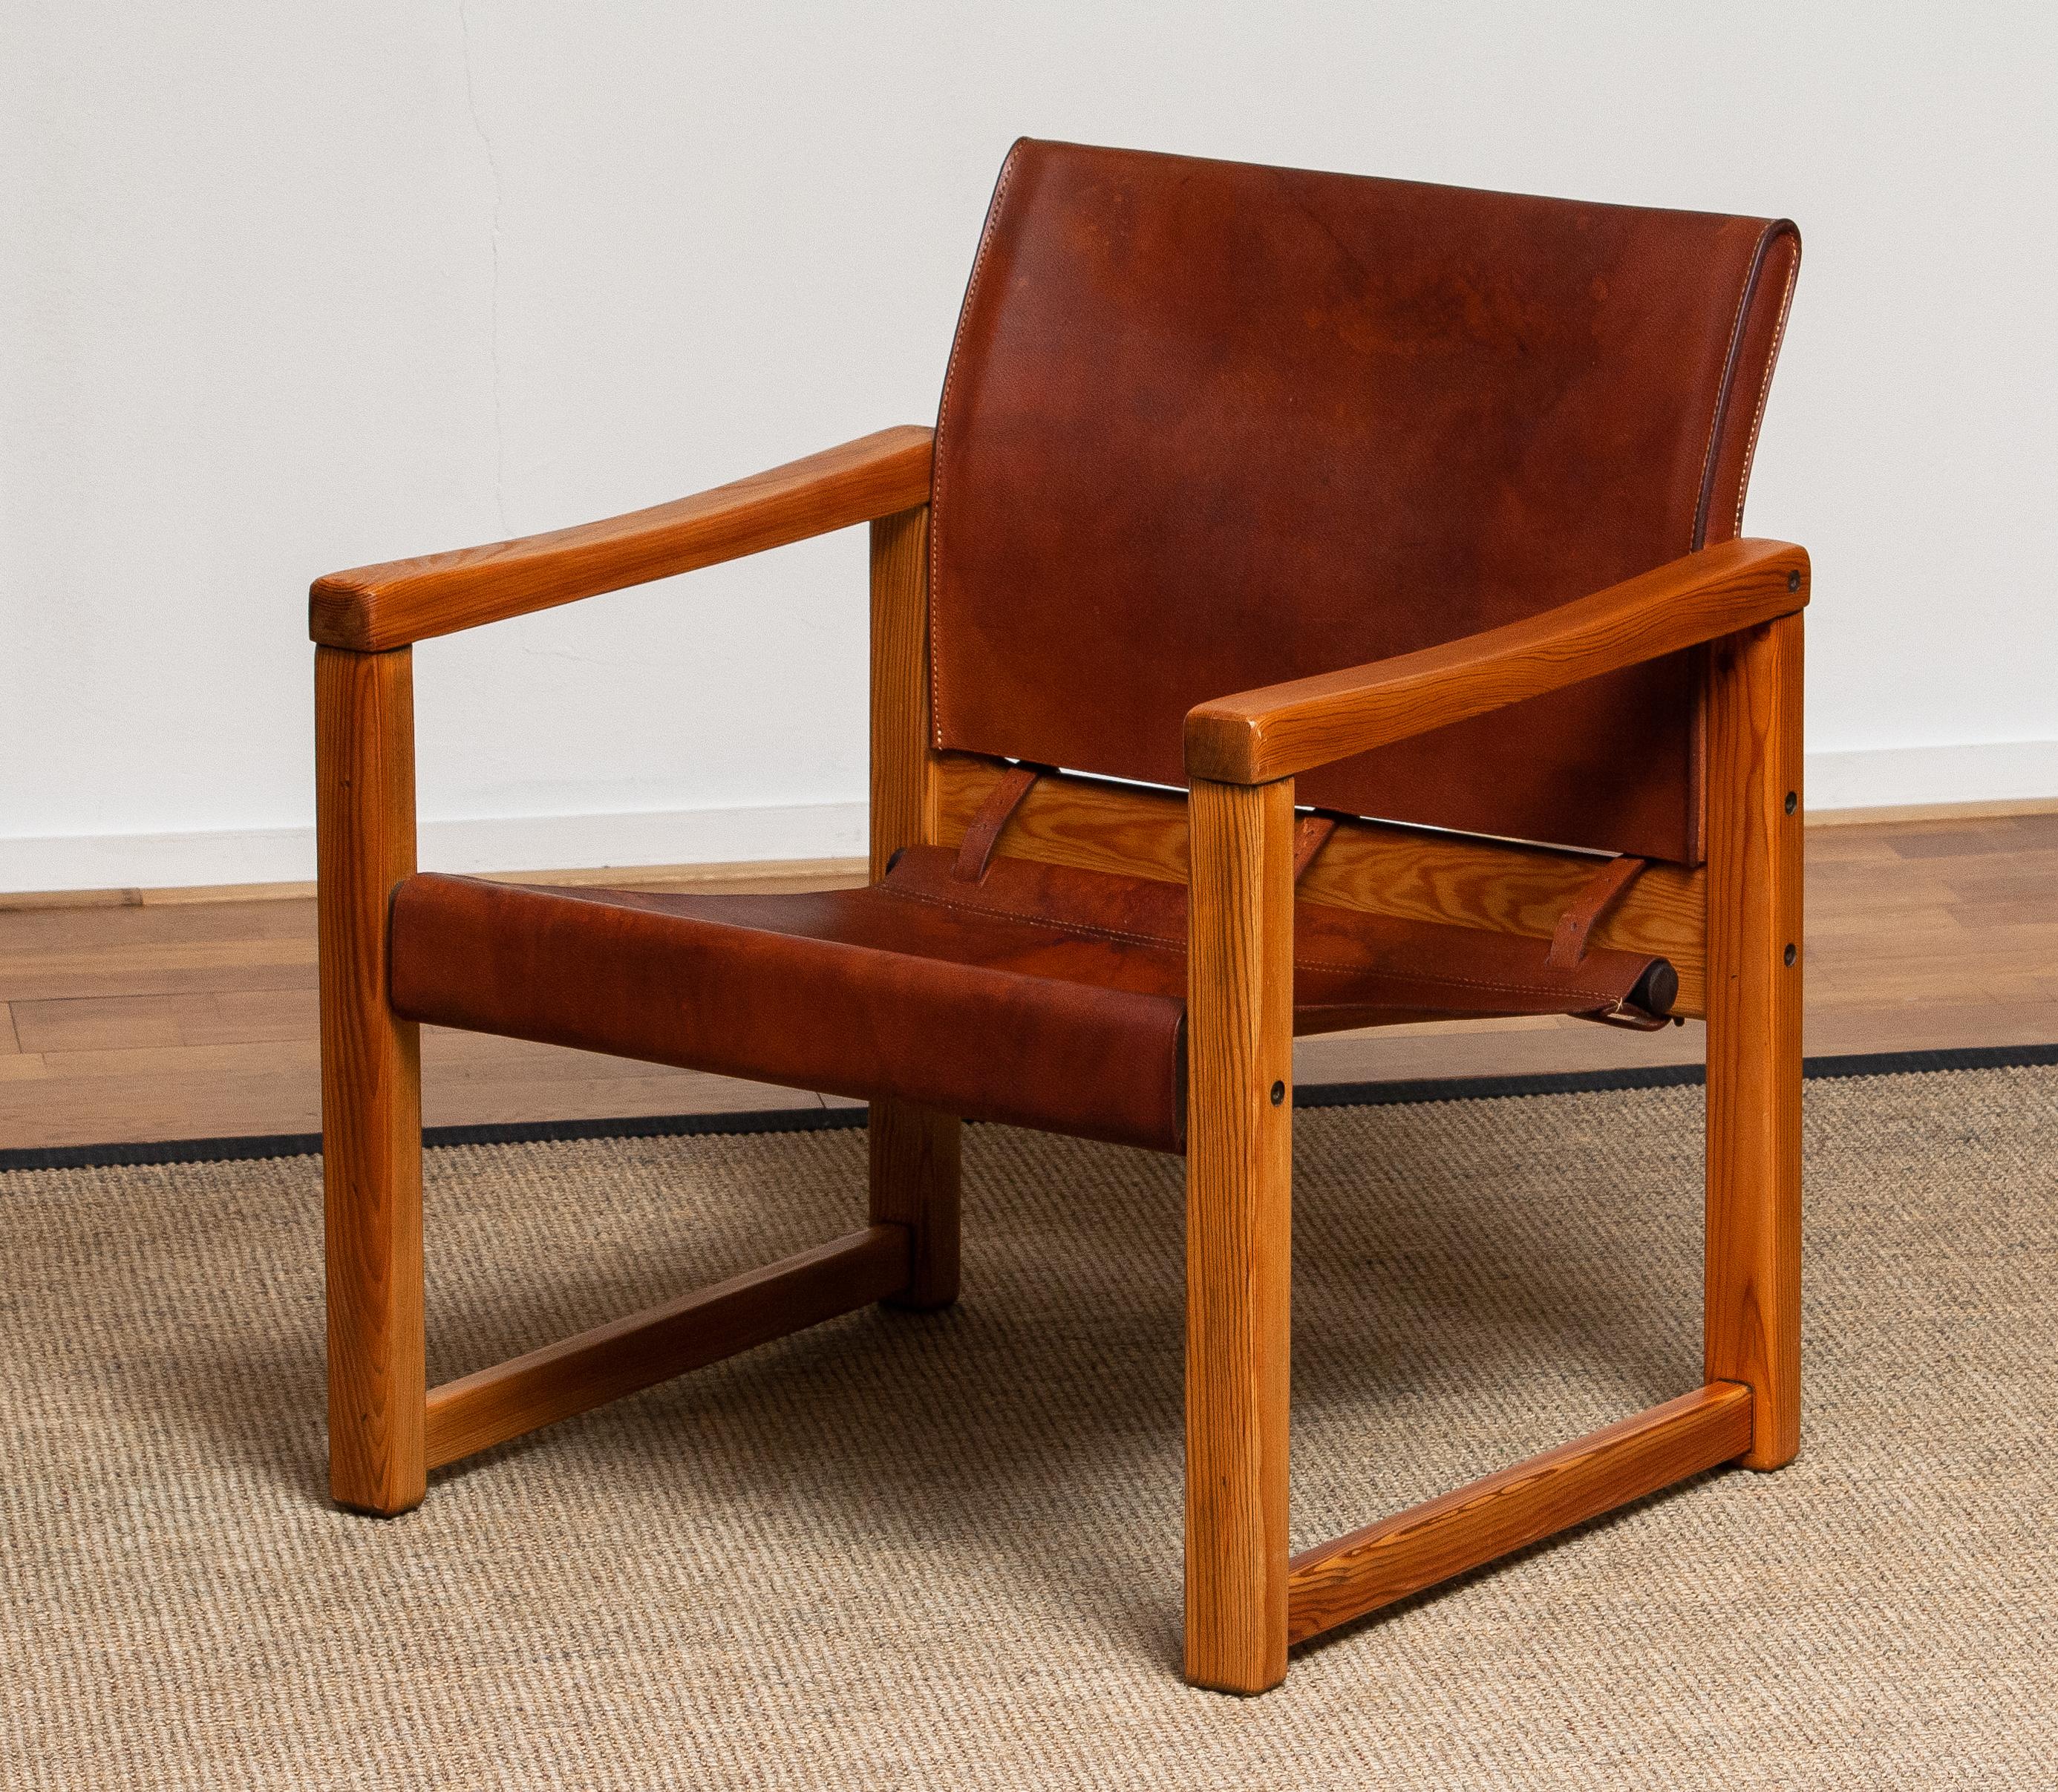 Beautiful leather safari chair (Model Diana) designed by Karin Mobring for Ikea Sweden. The model is lounged in 1974.
The study cognac leather is in good and smooth condition and also has a beautiful patina true the years. Overall condition of the